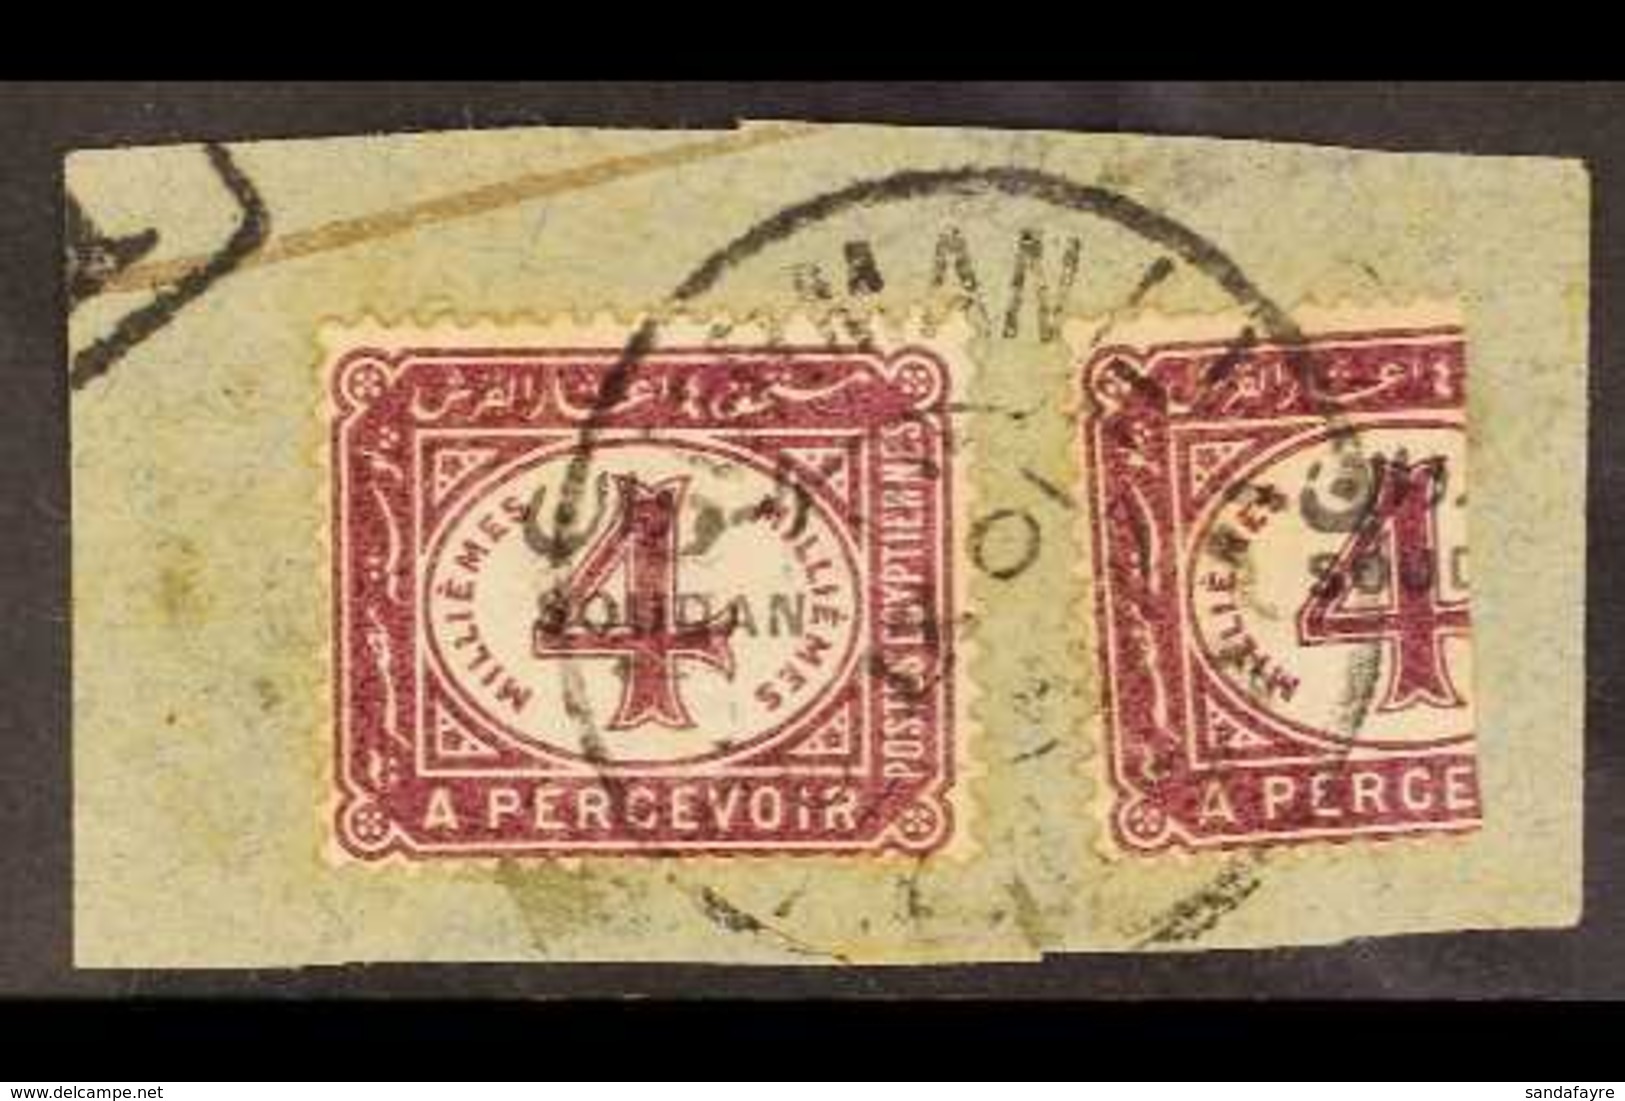 POSTAGE DUE 1897 4m Maroon BISECTED On Piece, SG D2a, Tied Omdurman Cds Of 6/9/01. Very Scarce, Some Minor Faults / Stai - Sudan (...-1951)